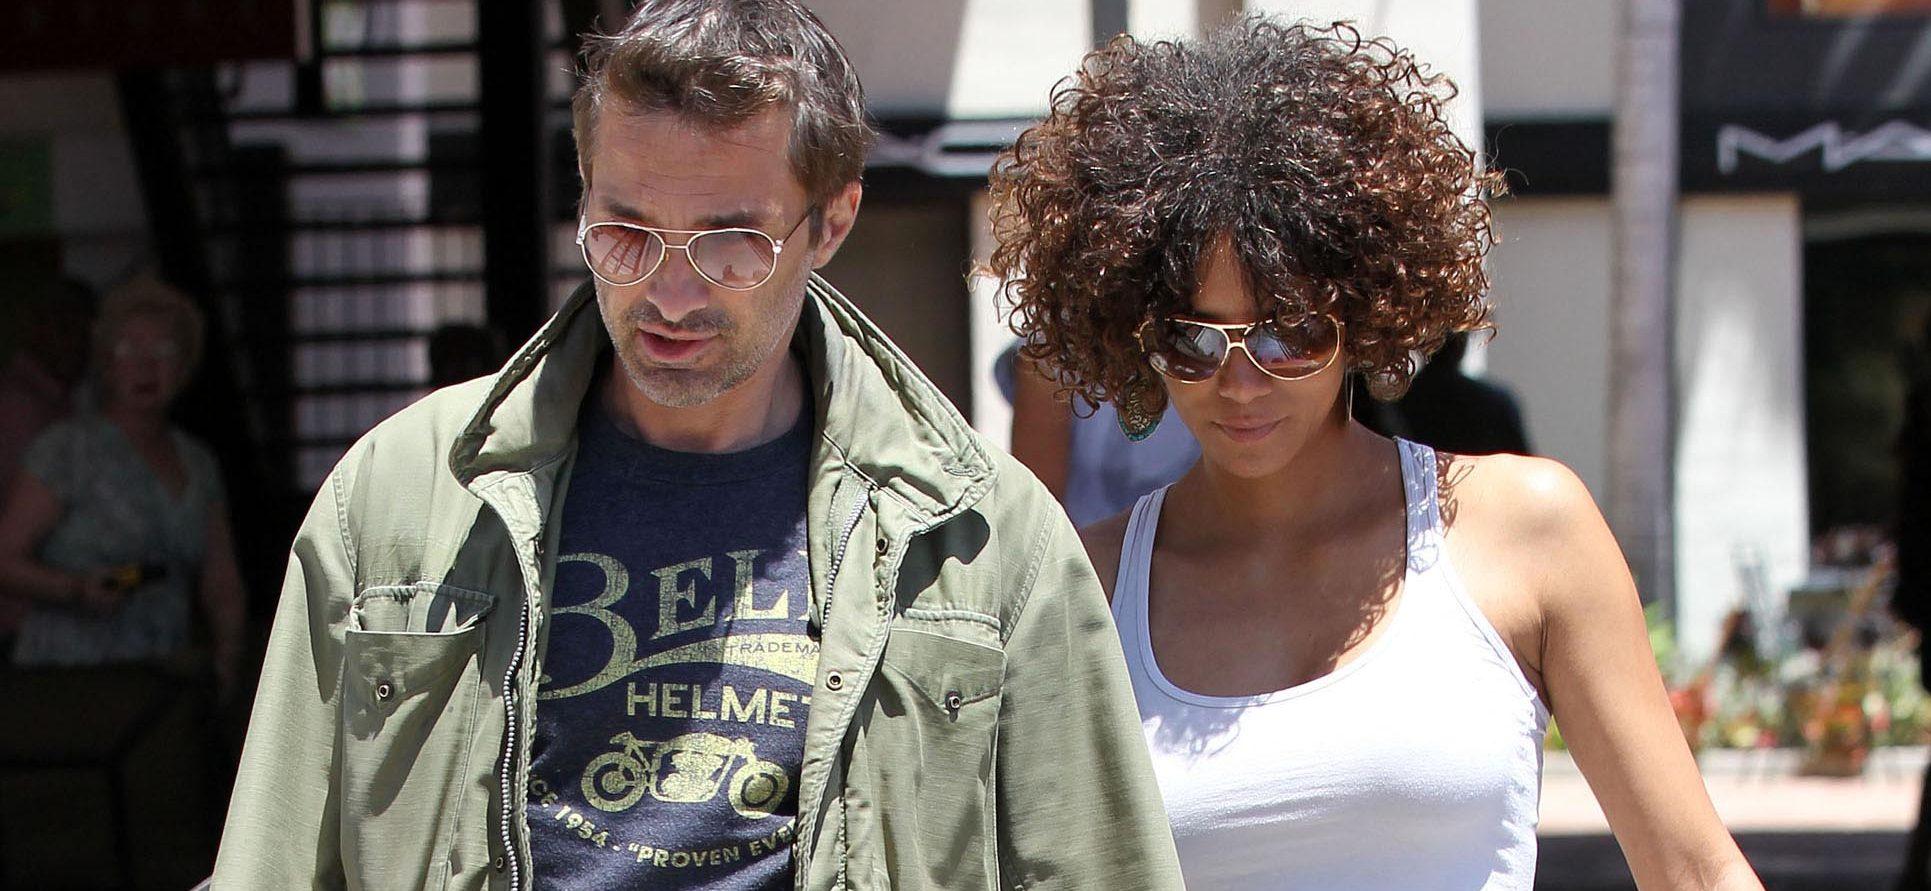 Halle Berry & Olivier Martinez Agree To Settle Their Divorce With Private Judge